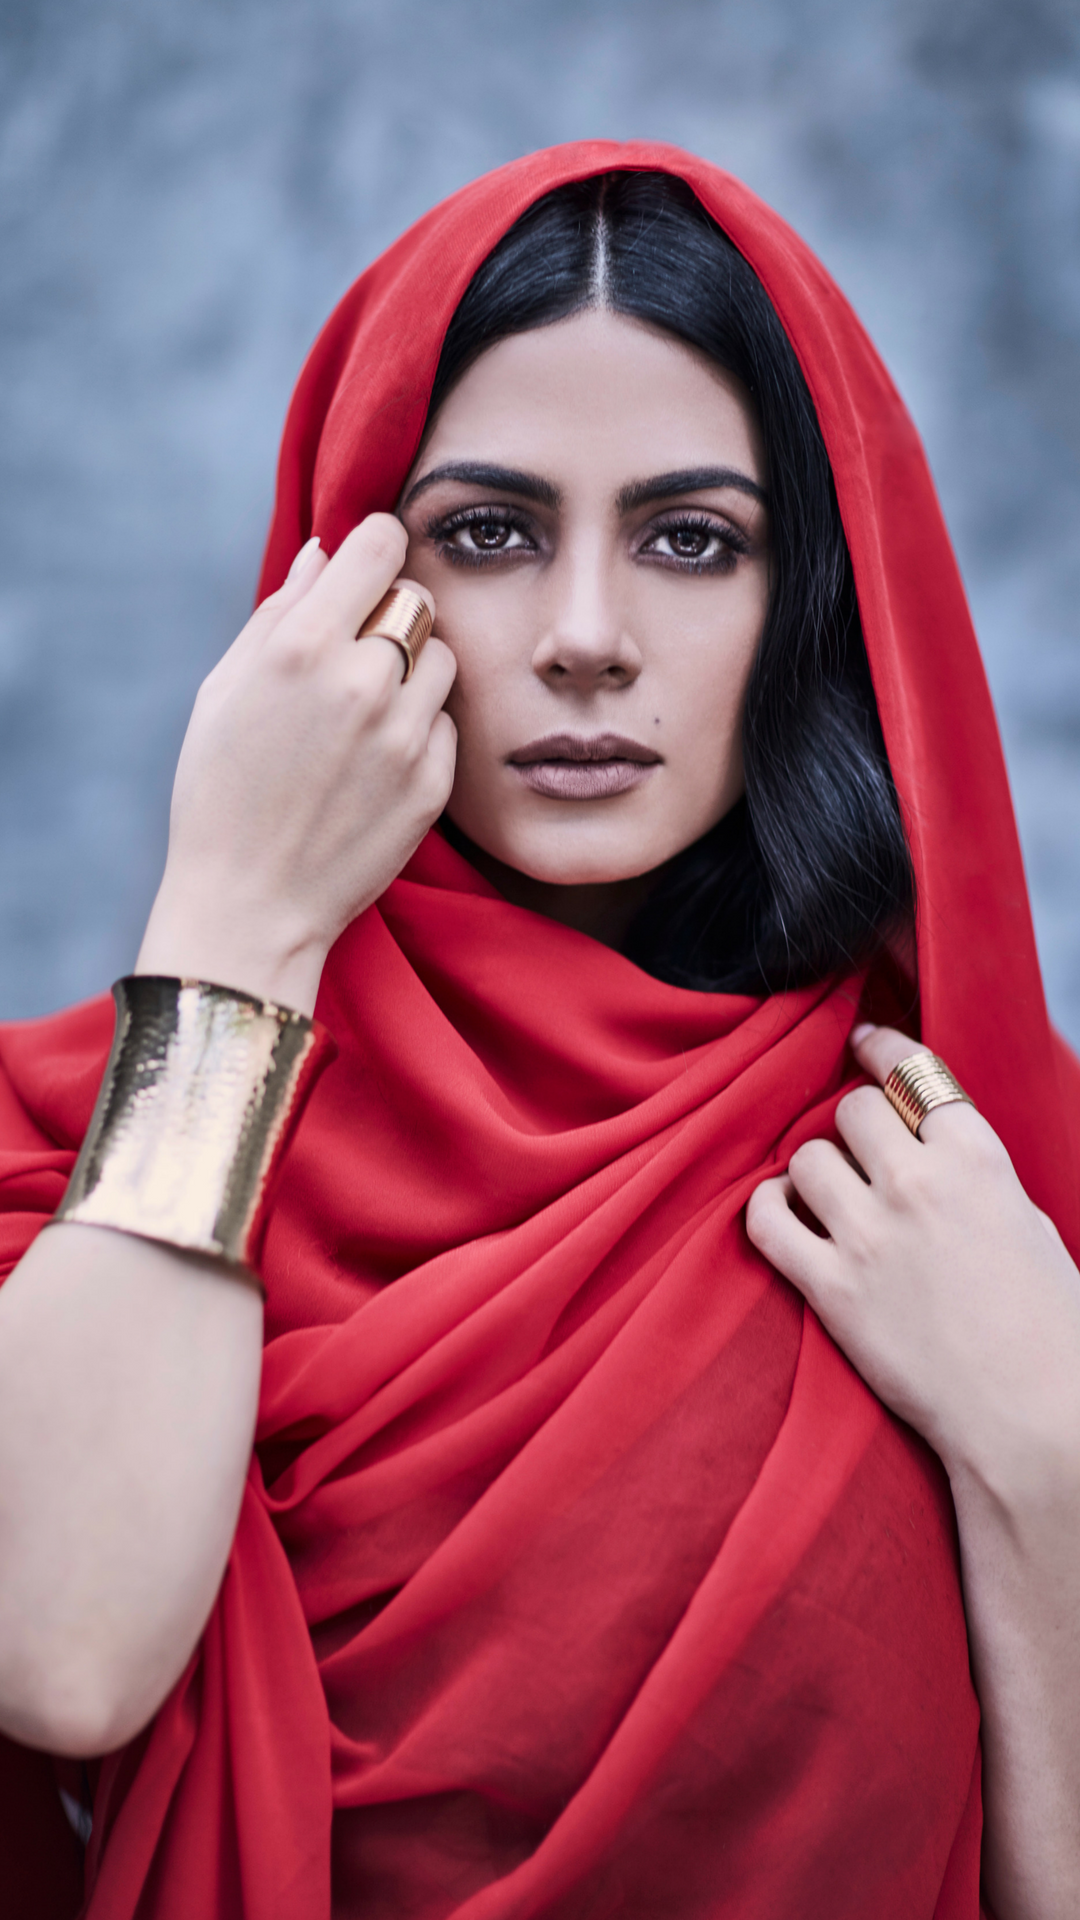 Shadowhunters Star Emeraude Toubia On Her Lebanese Roots